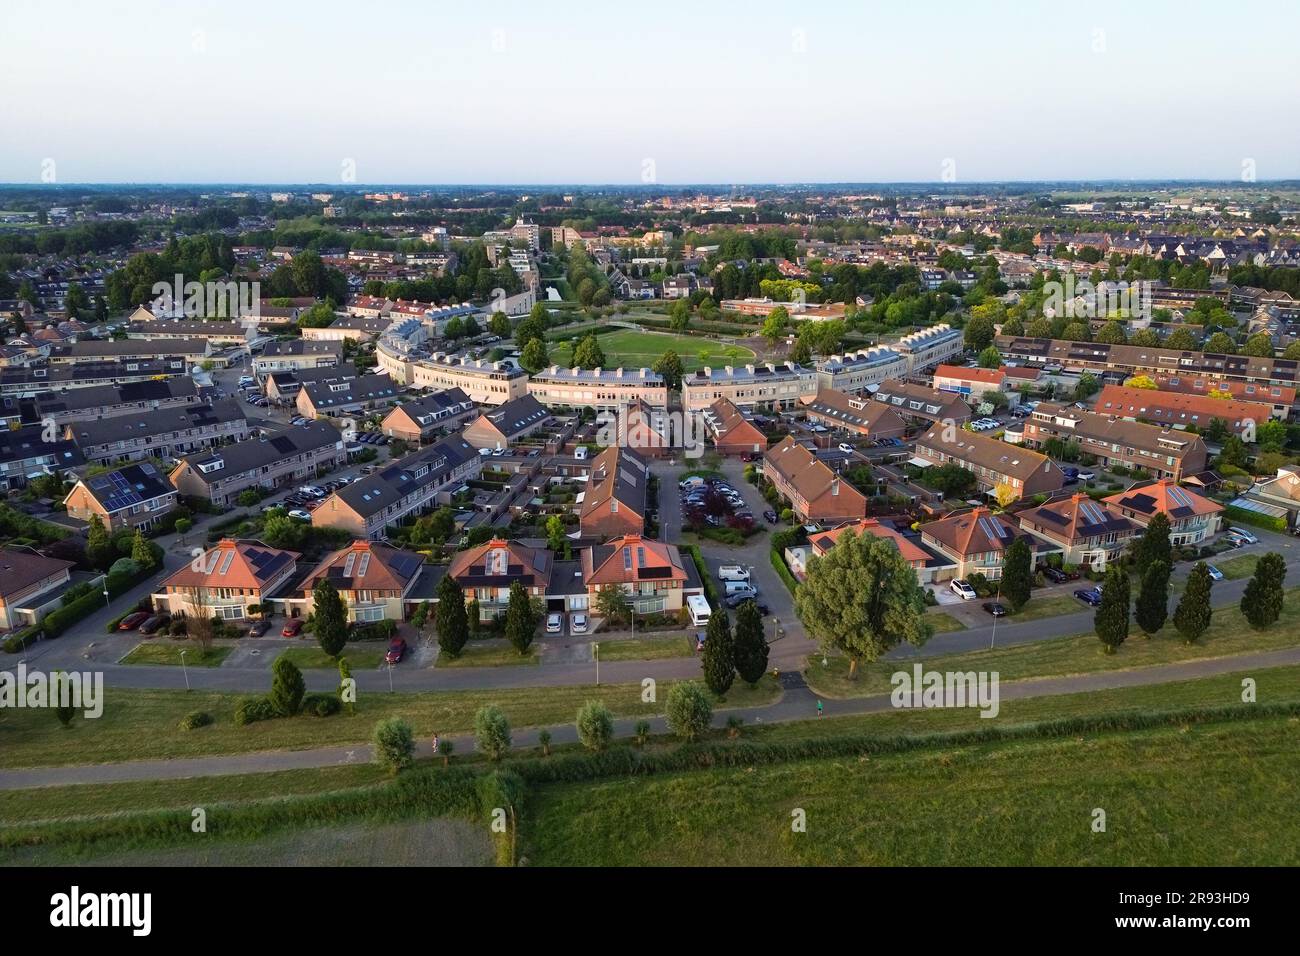 Scenic view of suburban district 'Zuidplas', a neighbourhood in the town of Waddinxveen, The Netherlands. Stock Photo